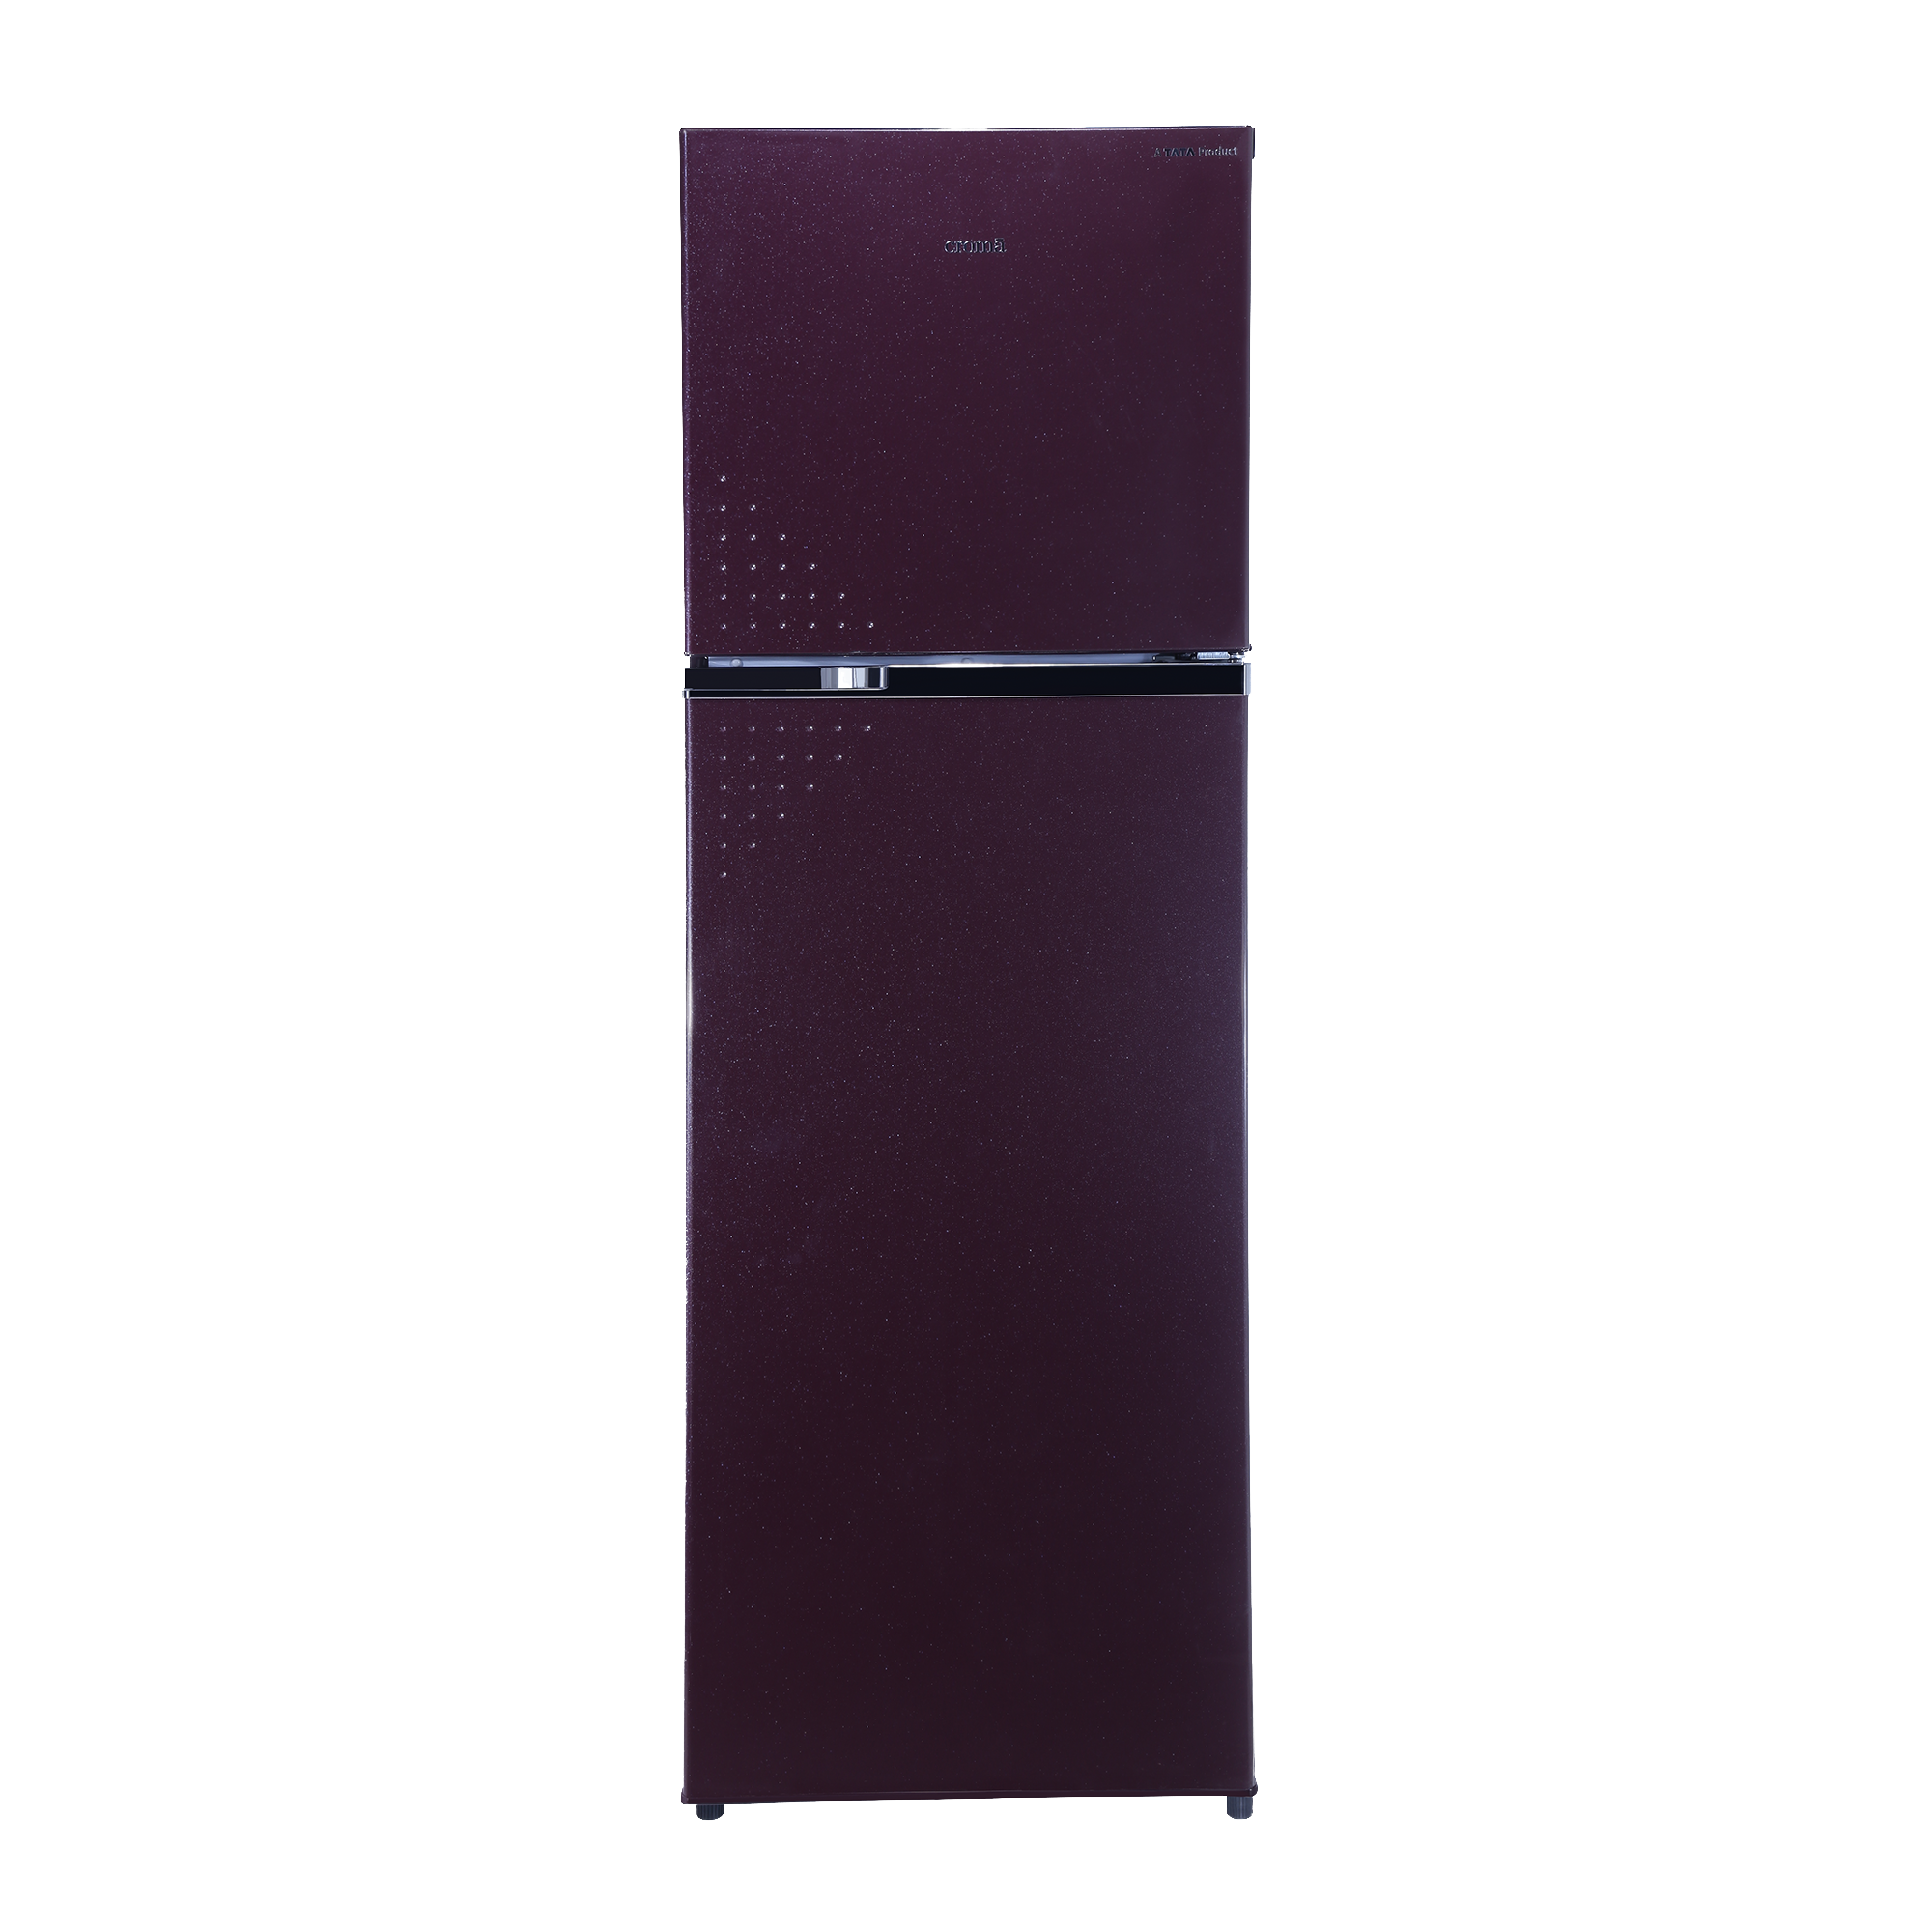 Croma 337 Litres 3 Star Frost Free Double Door Refrigerator with Large Vegetable Basket (CRLR340FFD259609, Wine Red)_1